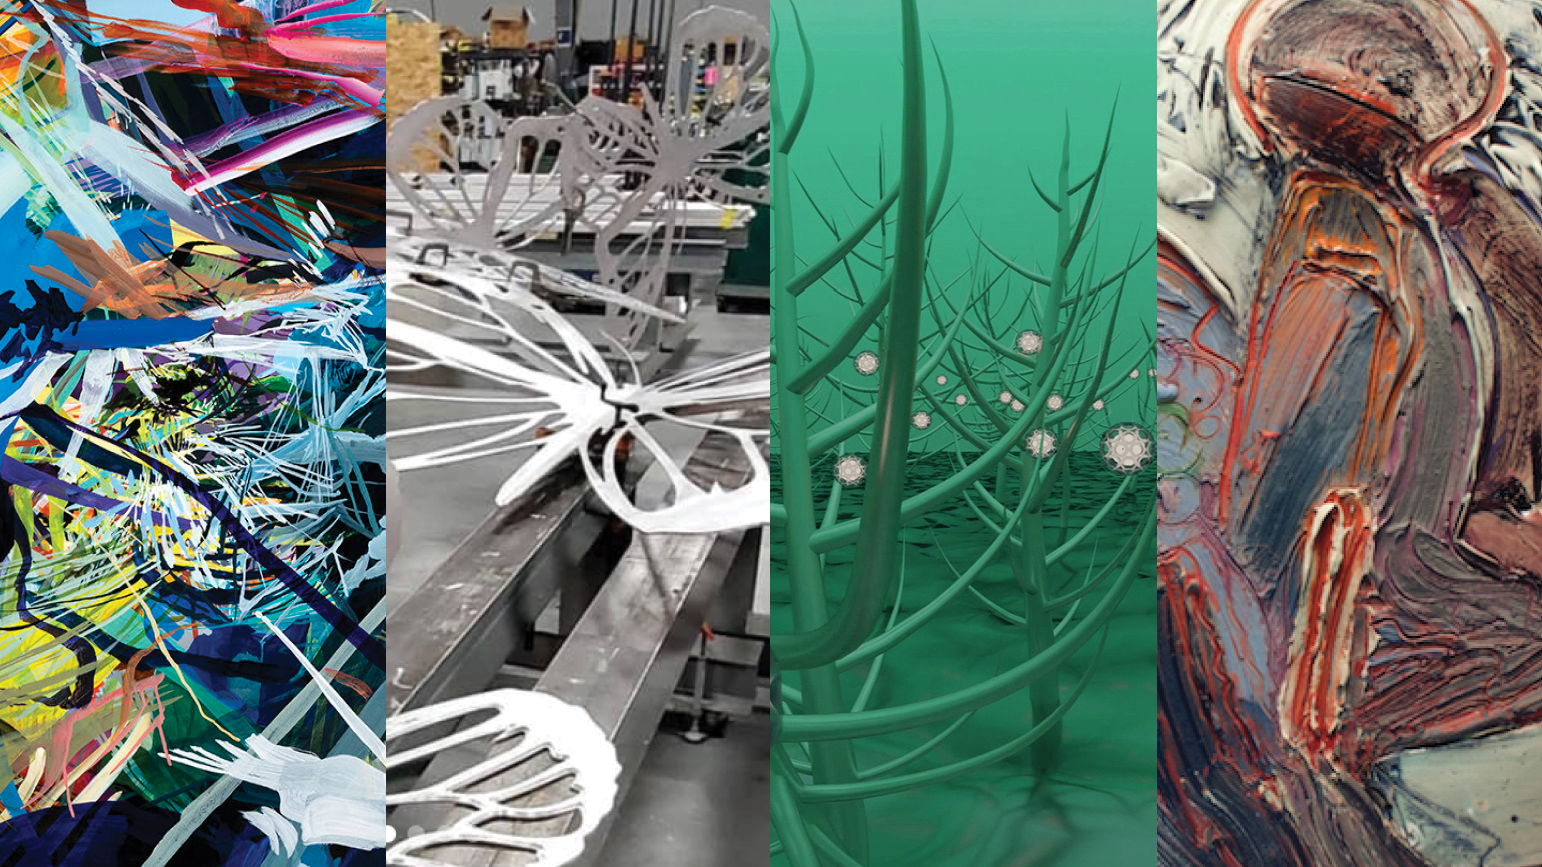 Four images: 1. Abstract painting; 2. Metal sculptures of butterflies; 3. Abstract digital image of nature; 4. Abstract ceramic work